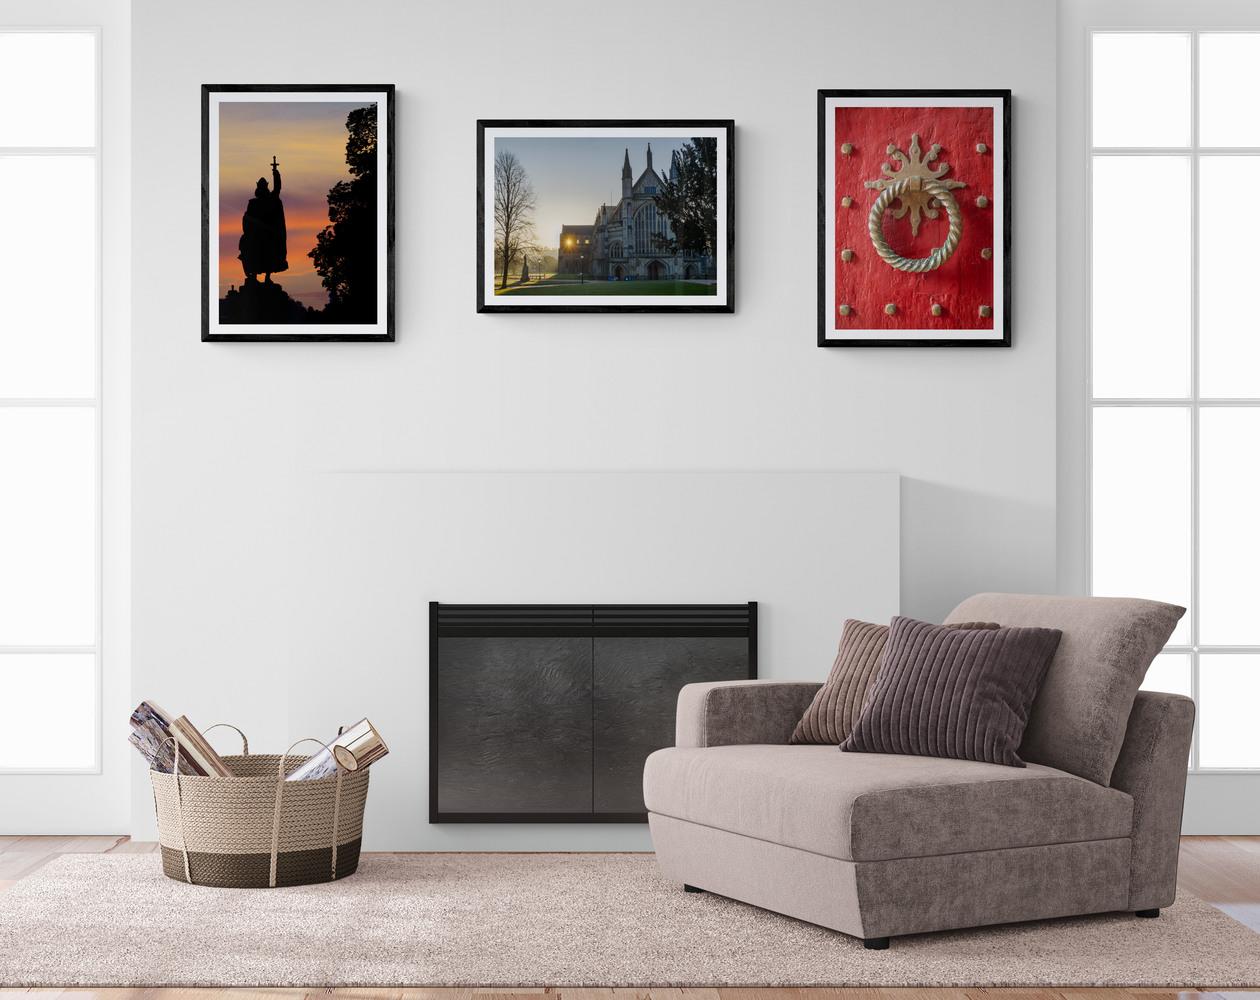 An example of three framed prints in a living space